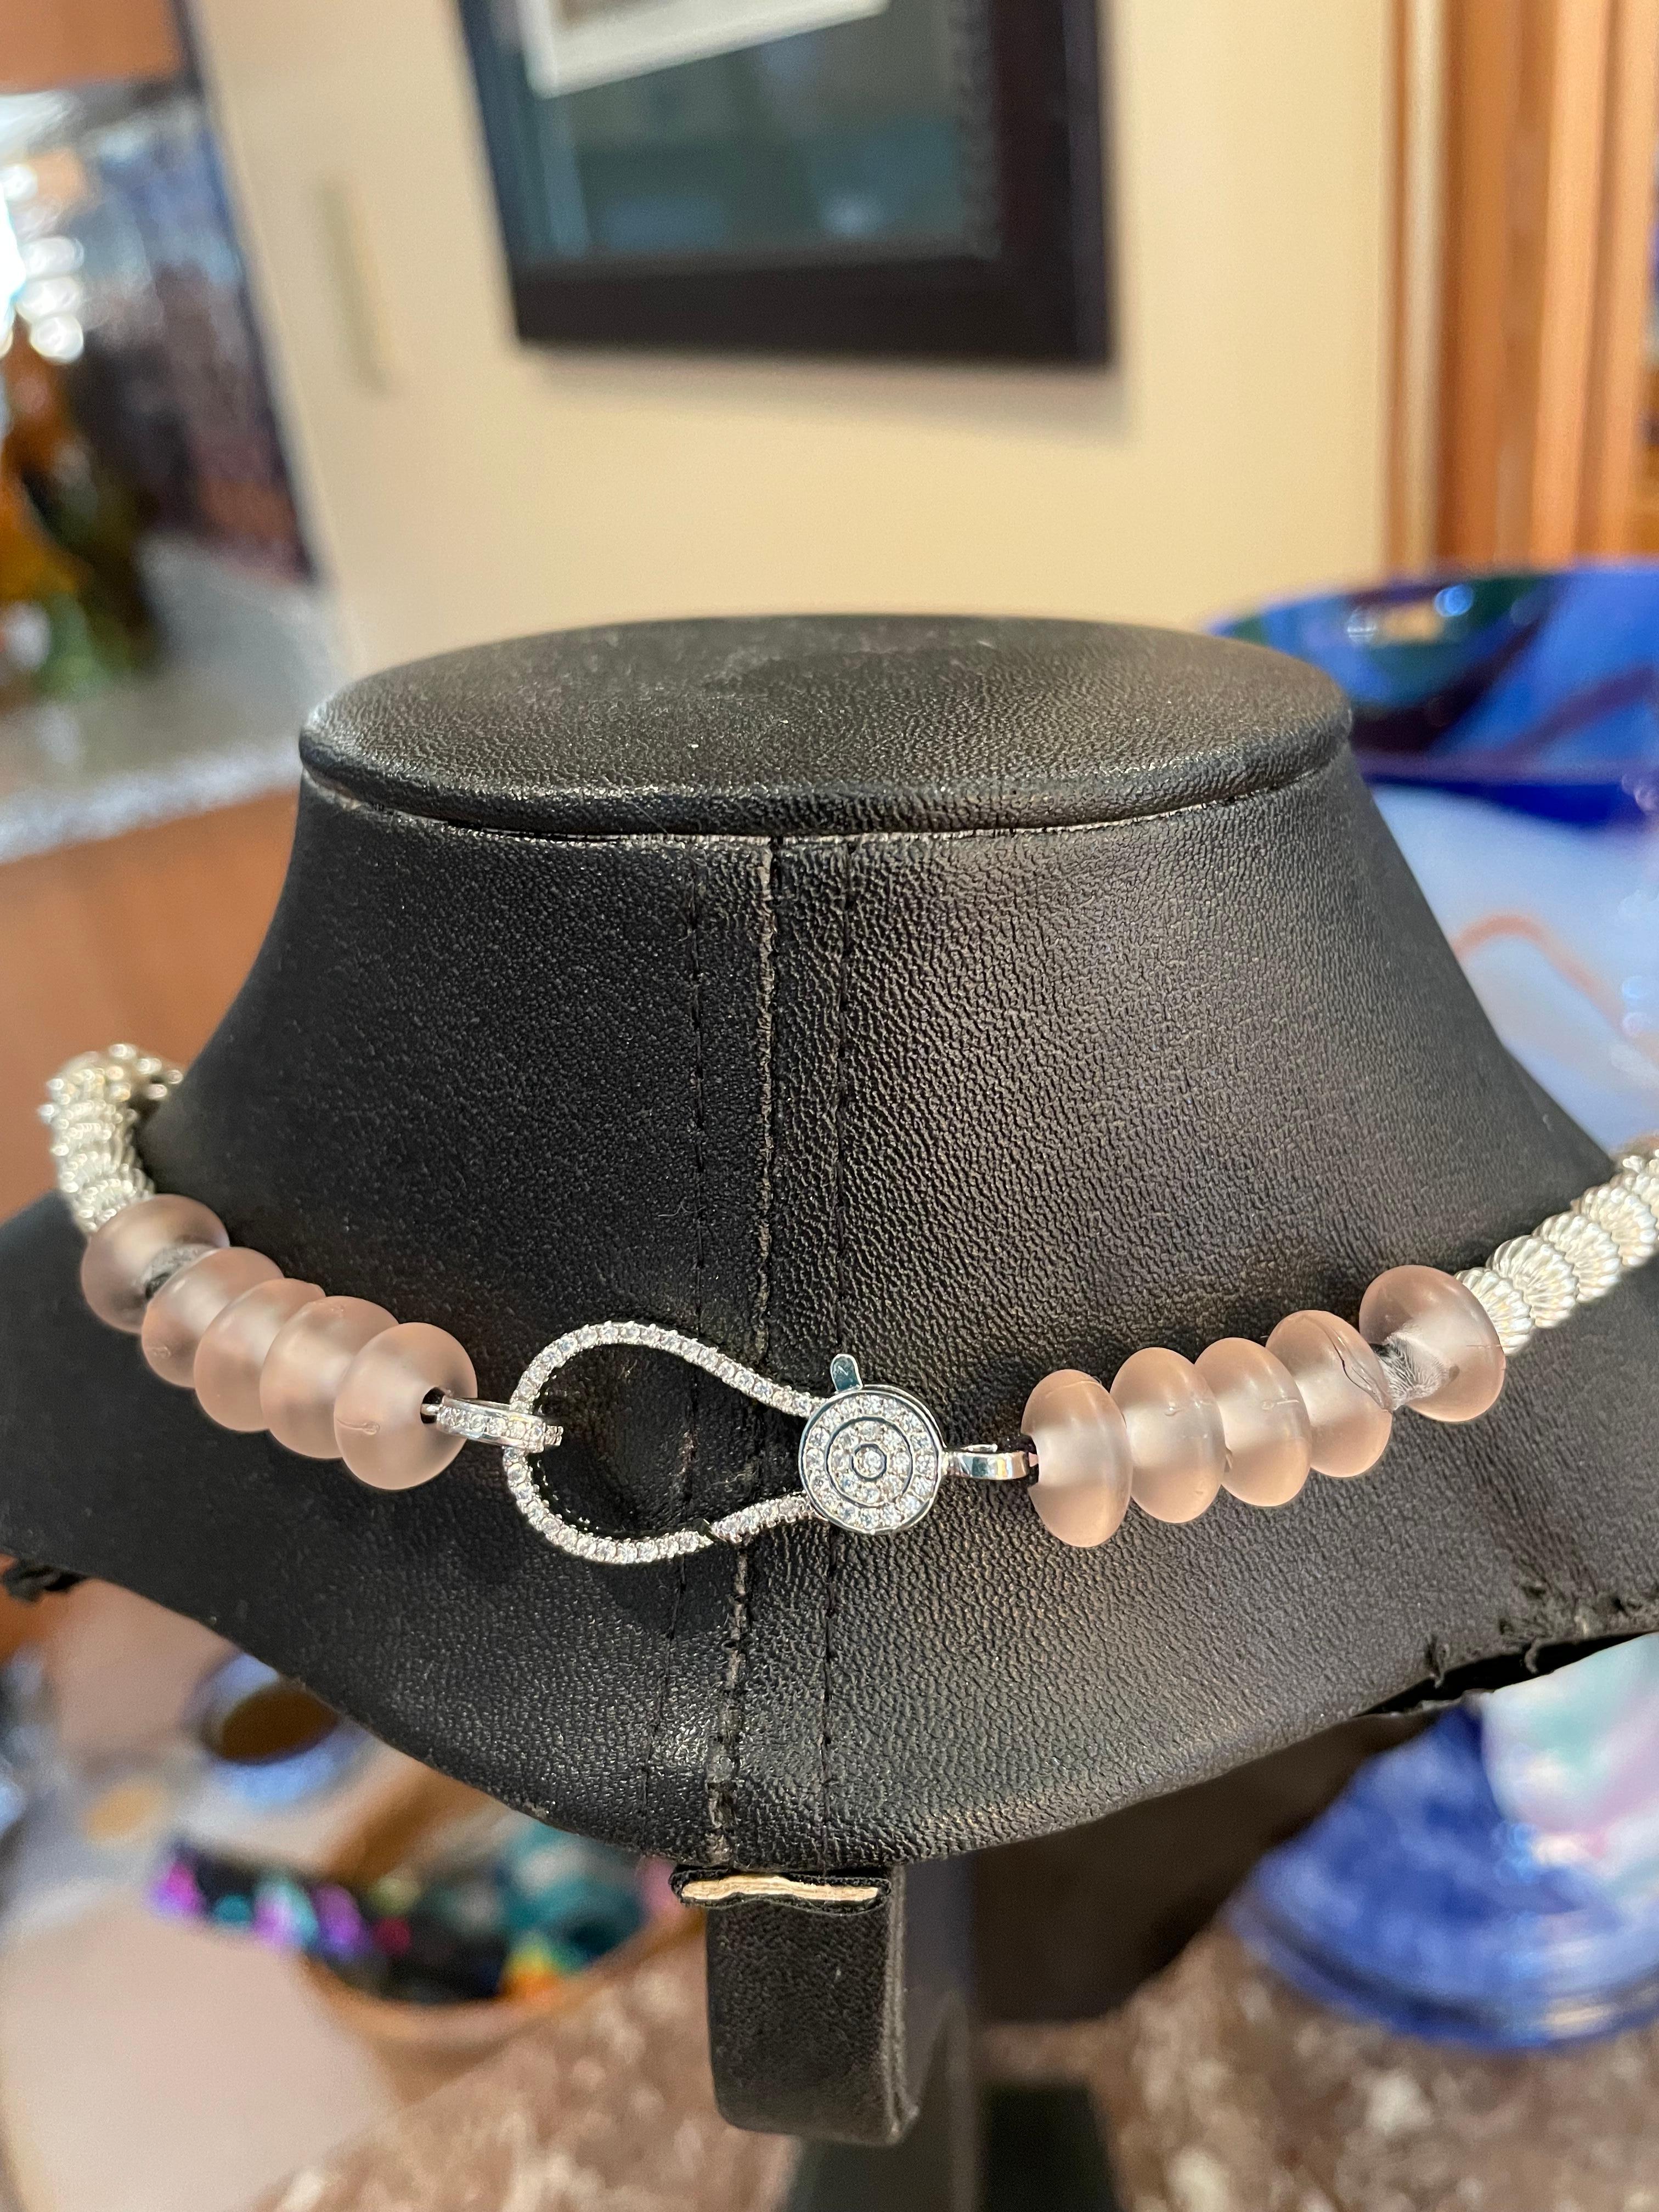 Large freshwater pink pearls,with a vintage Sterling Silver pierced floral pendant is on offer from Lorraine’s Bijoux. This handmade,one of a kind,statement necklace is enhanced with sterling silver beads and a large sterling lobster claw clasp with